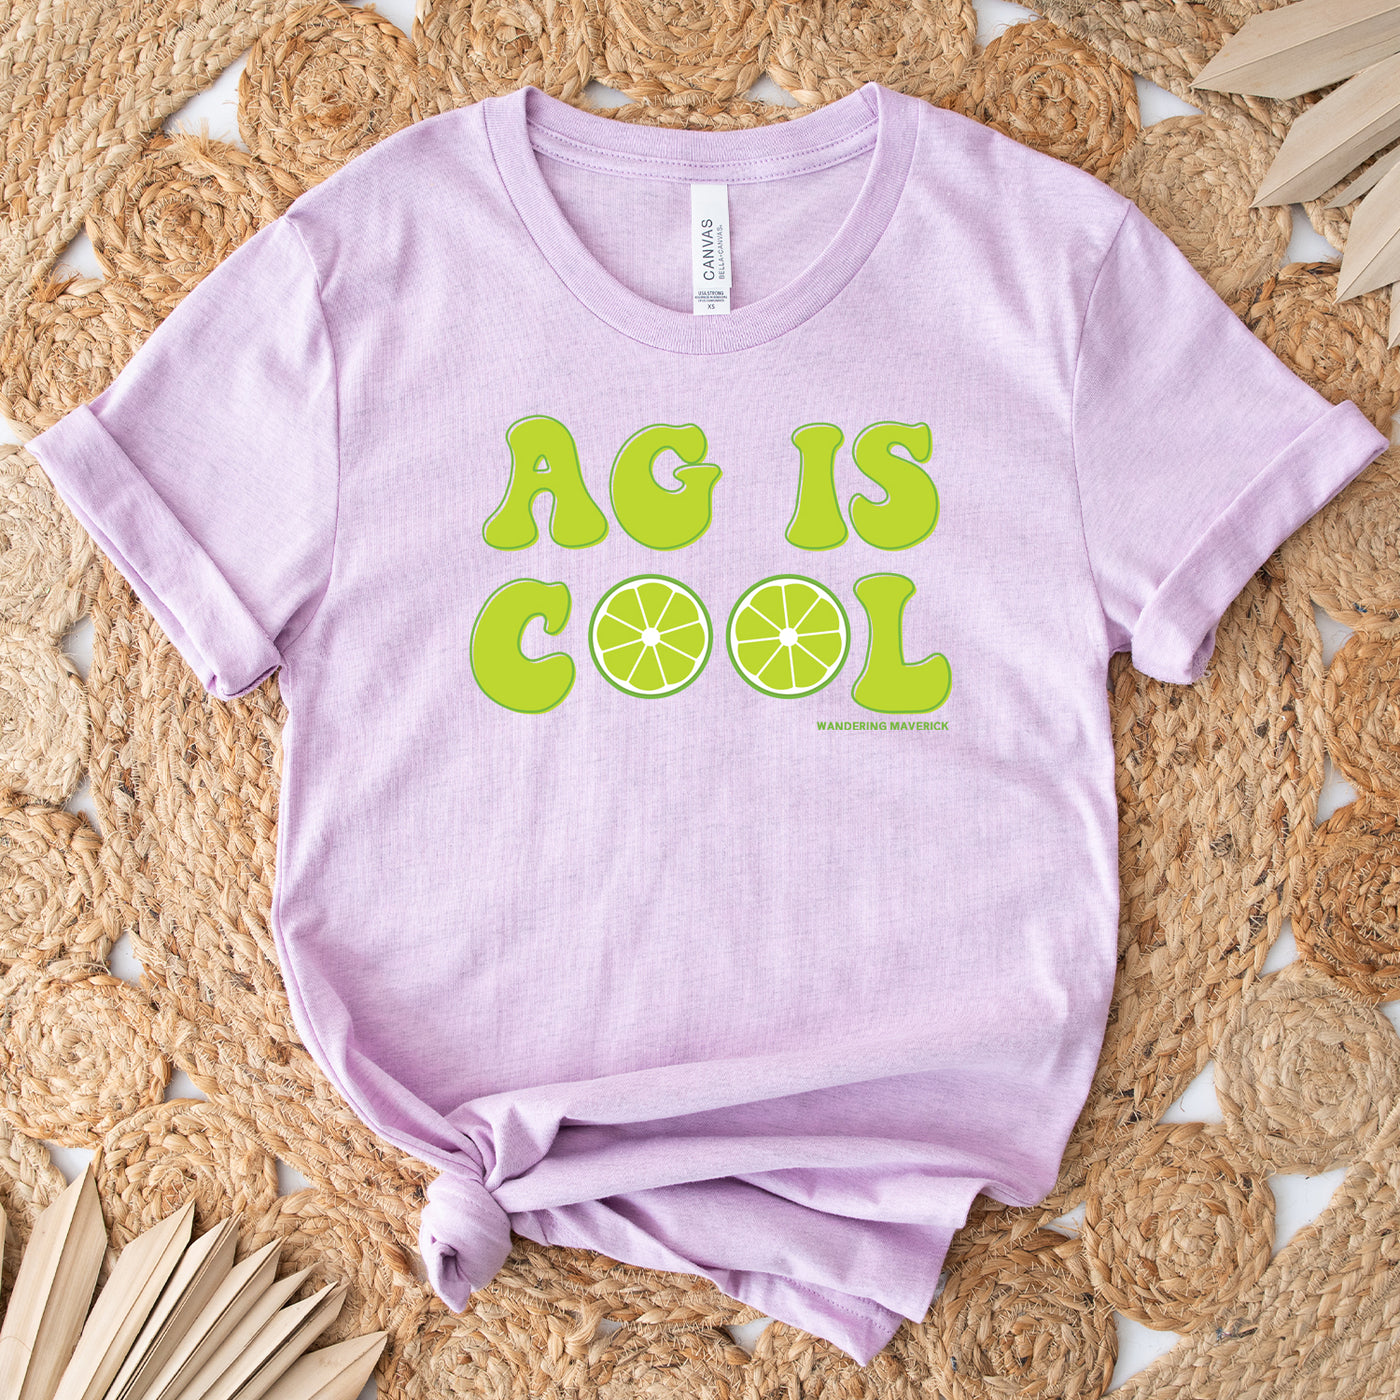 Lime Ag Is Cool T-Shirt (XS-4XL) - Multiple Colors!